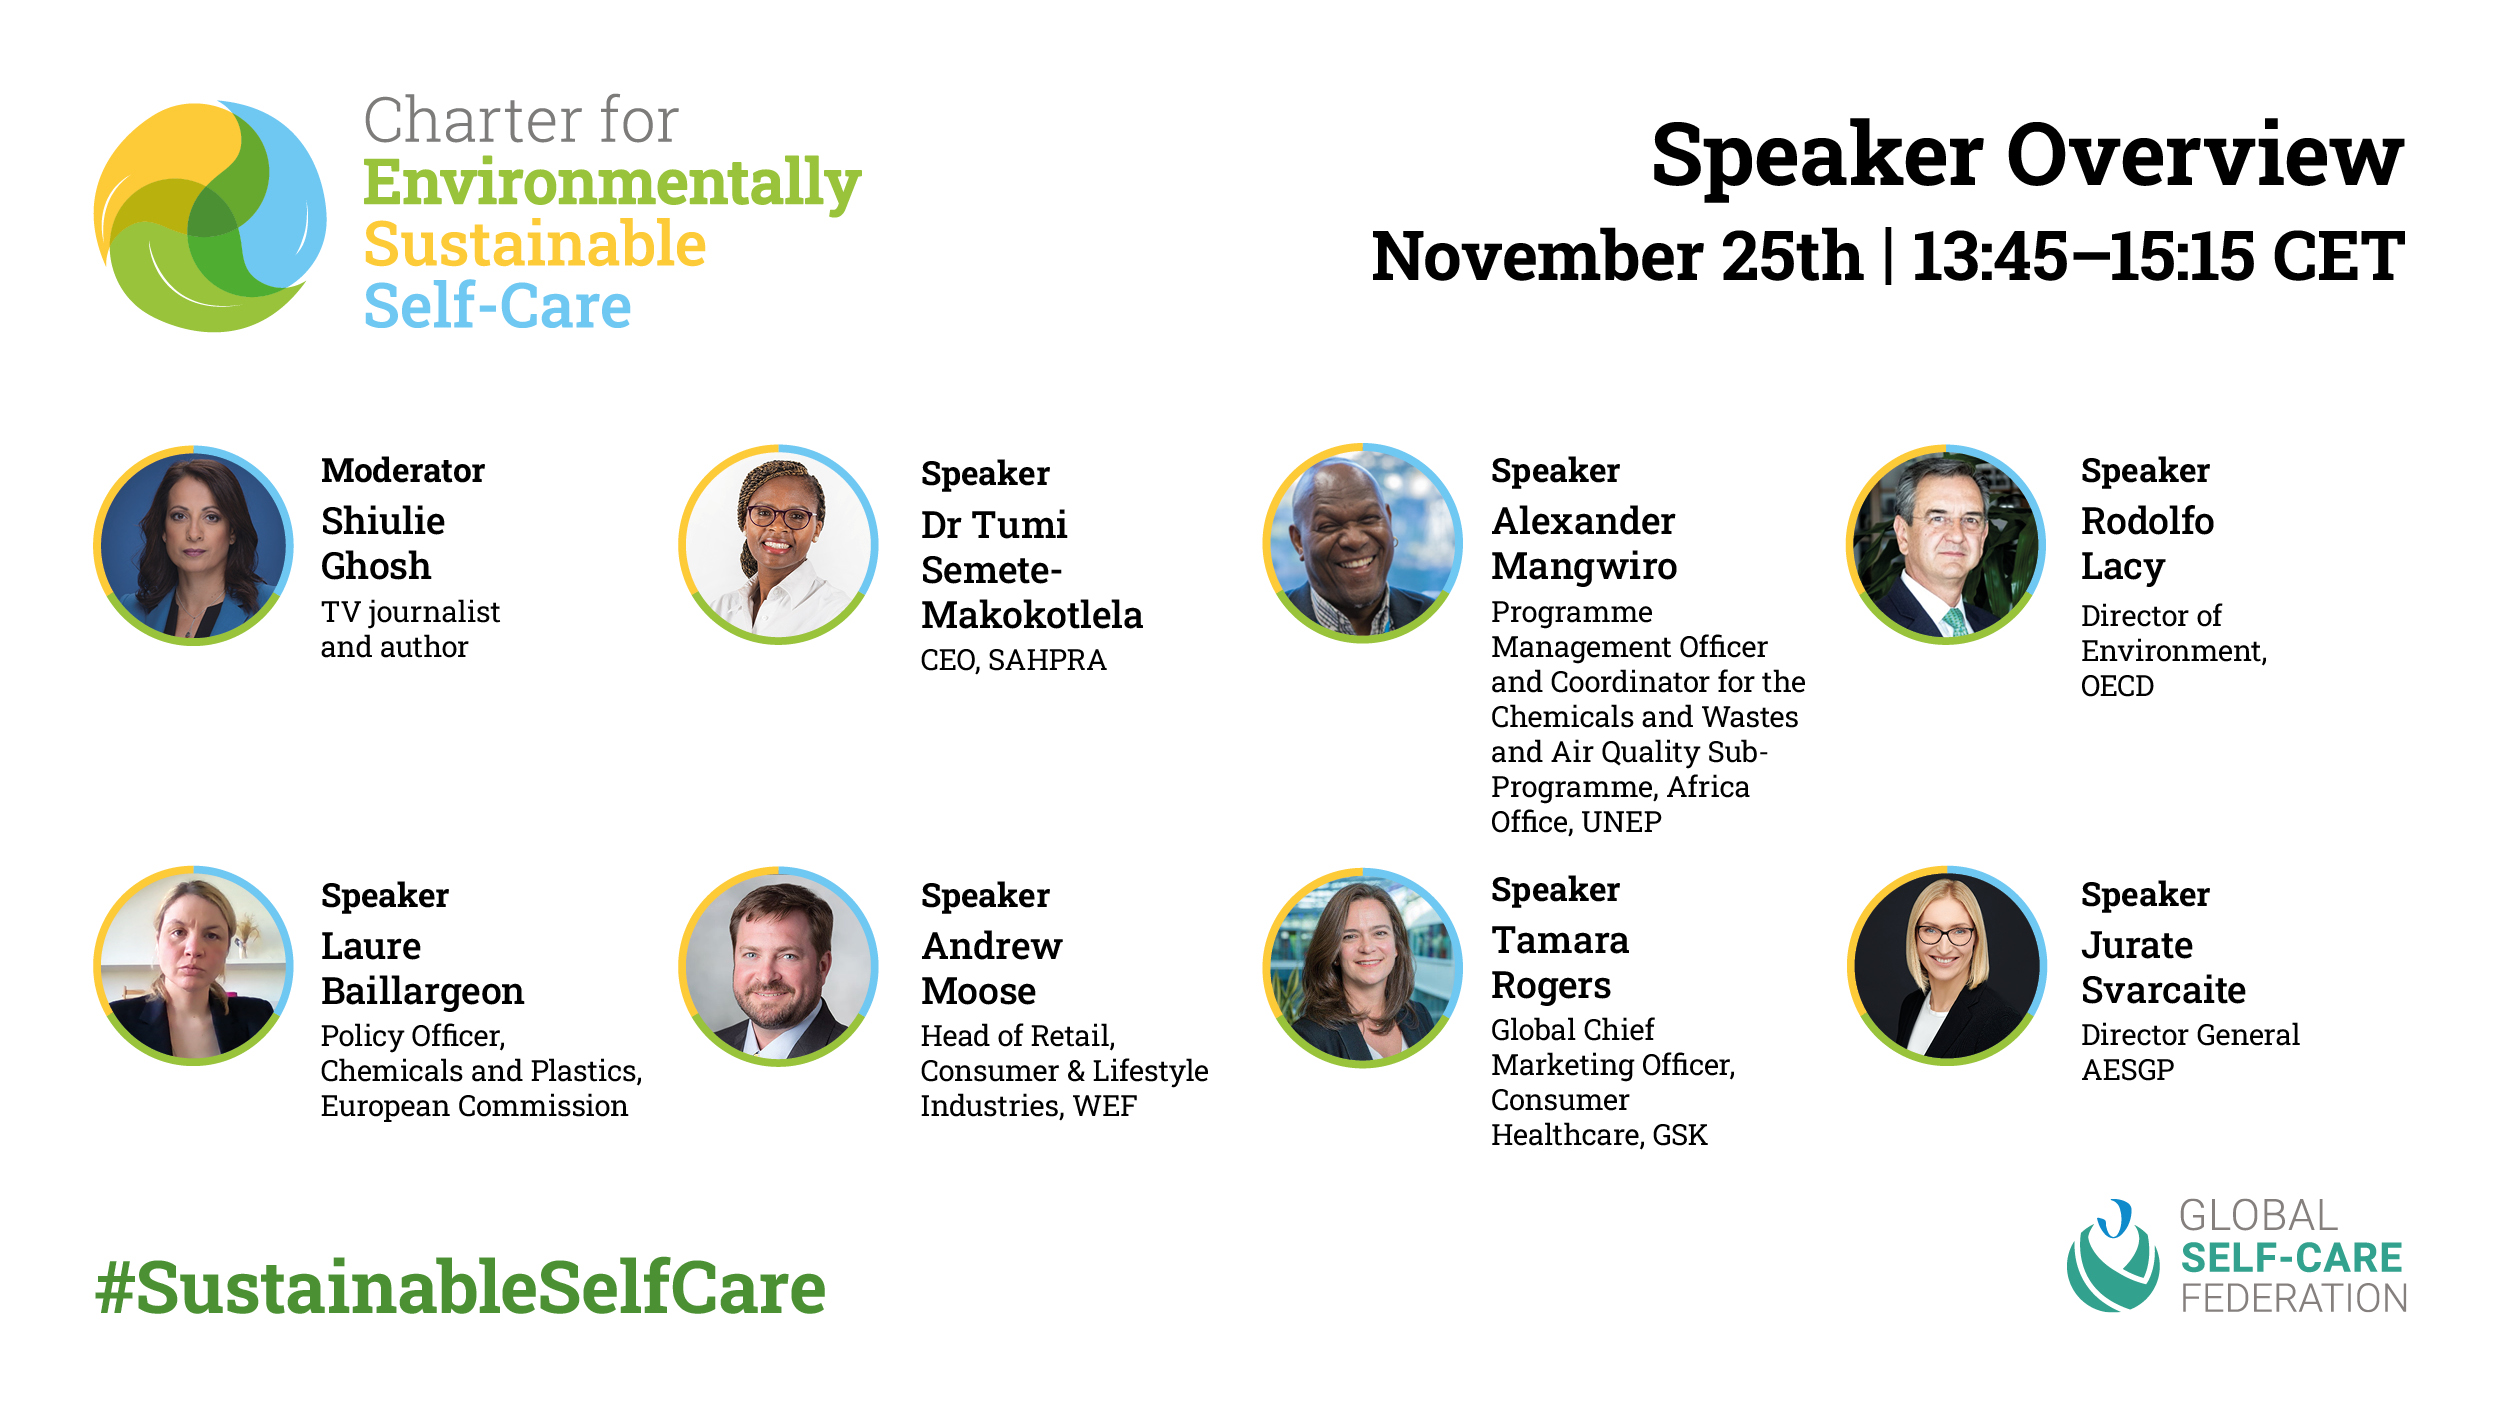 Charter for Environmentally Sustainable Self-Care Launch